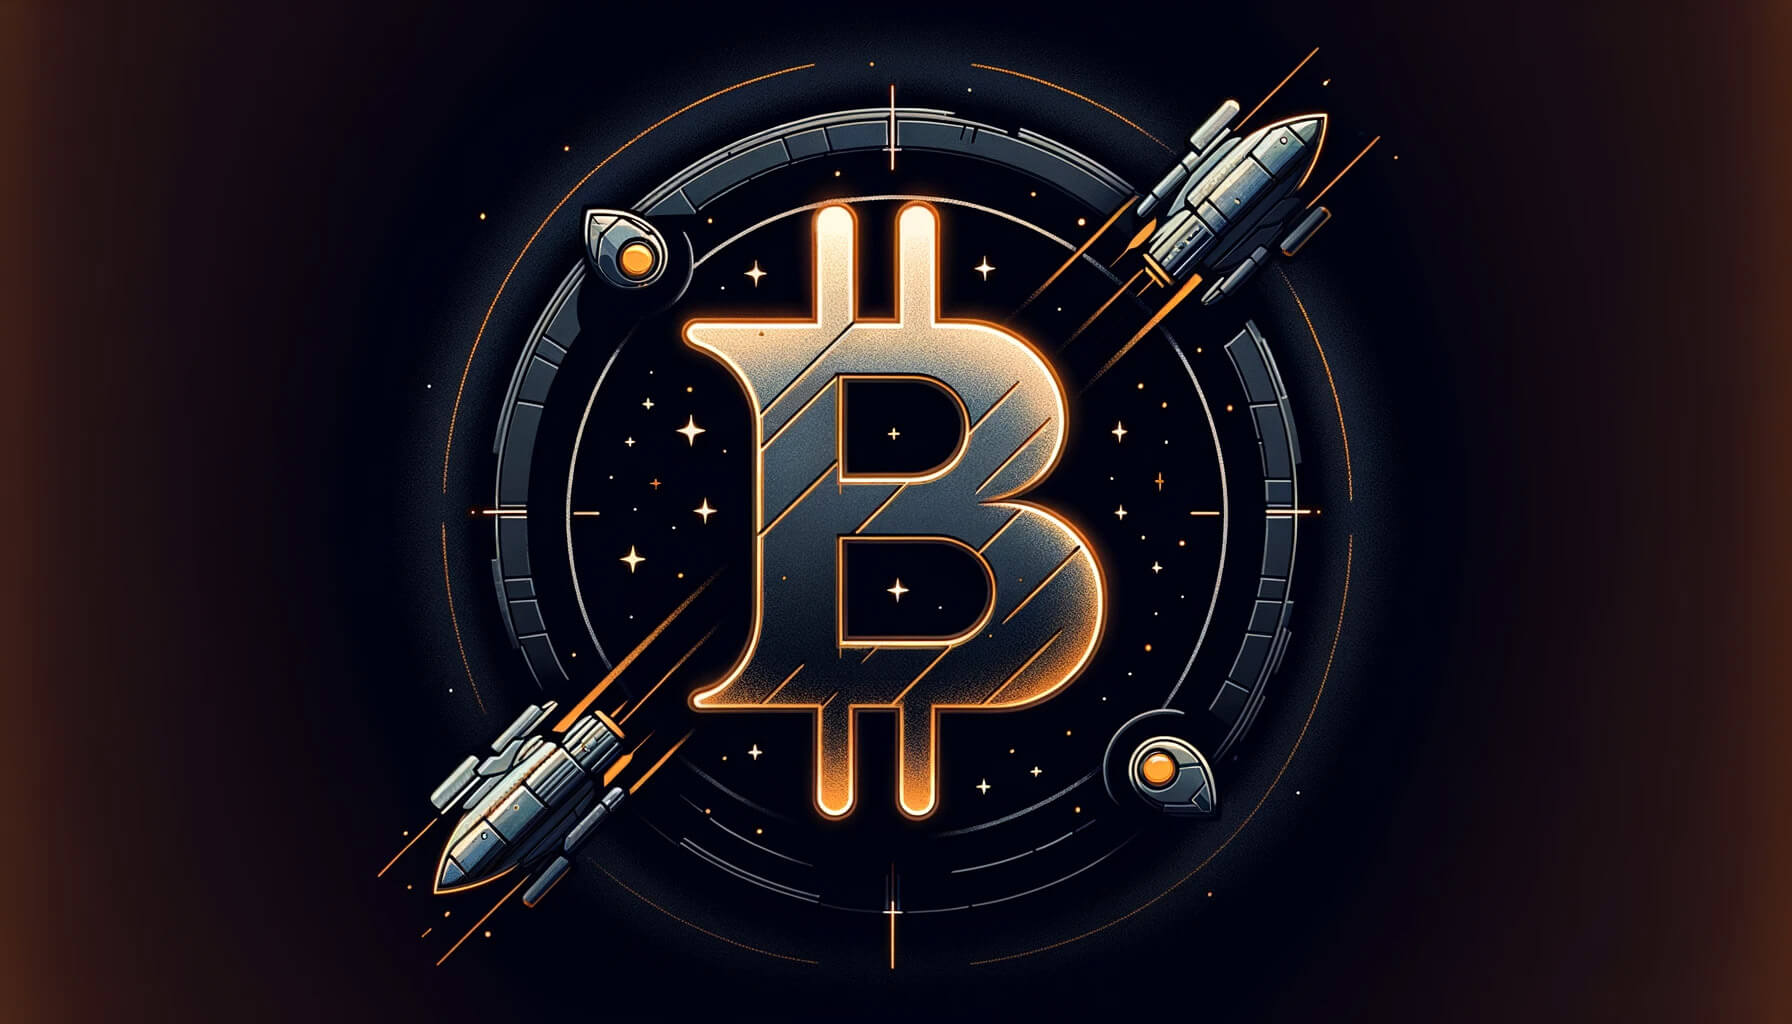 US Space Force Major urges Defense Department to adopt Bitcoin as an offset strategy